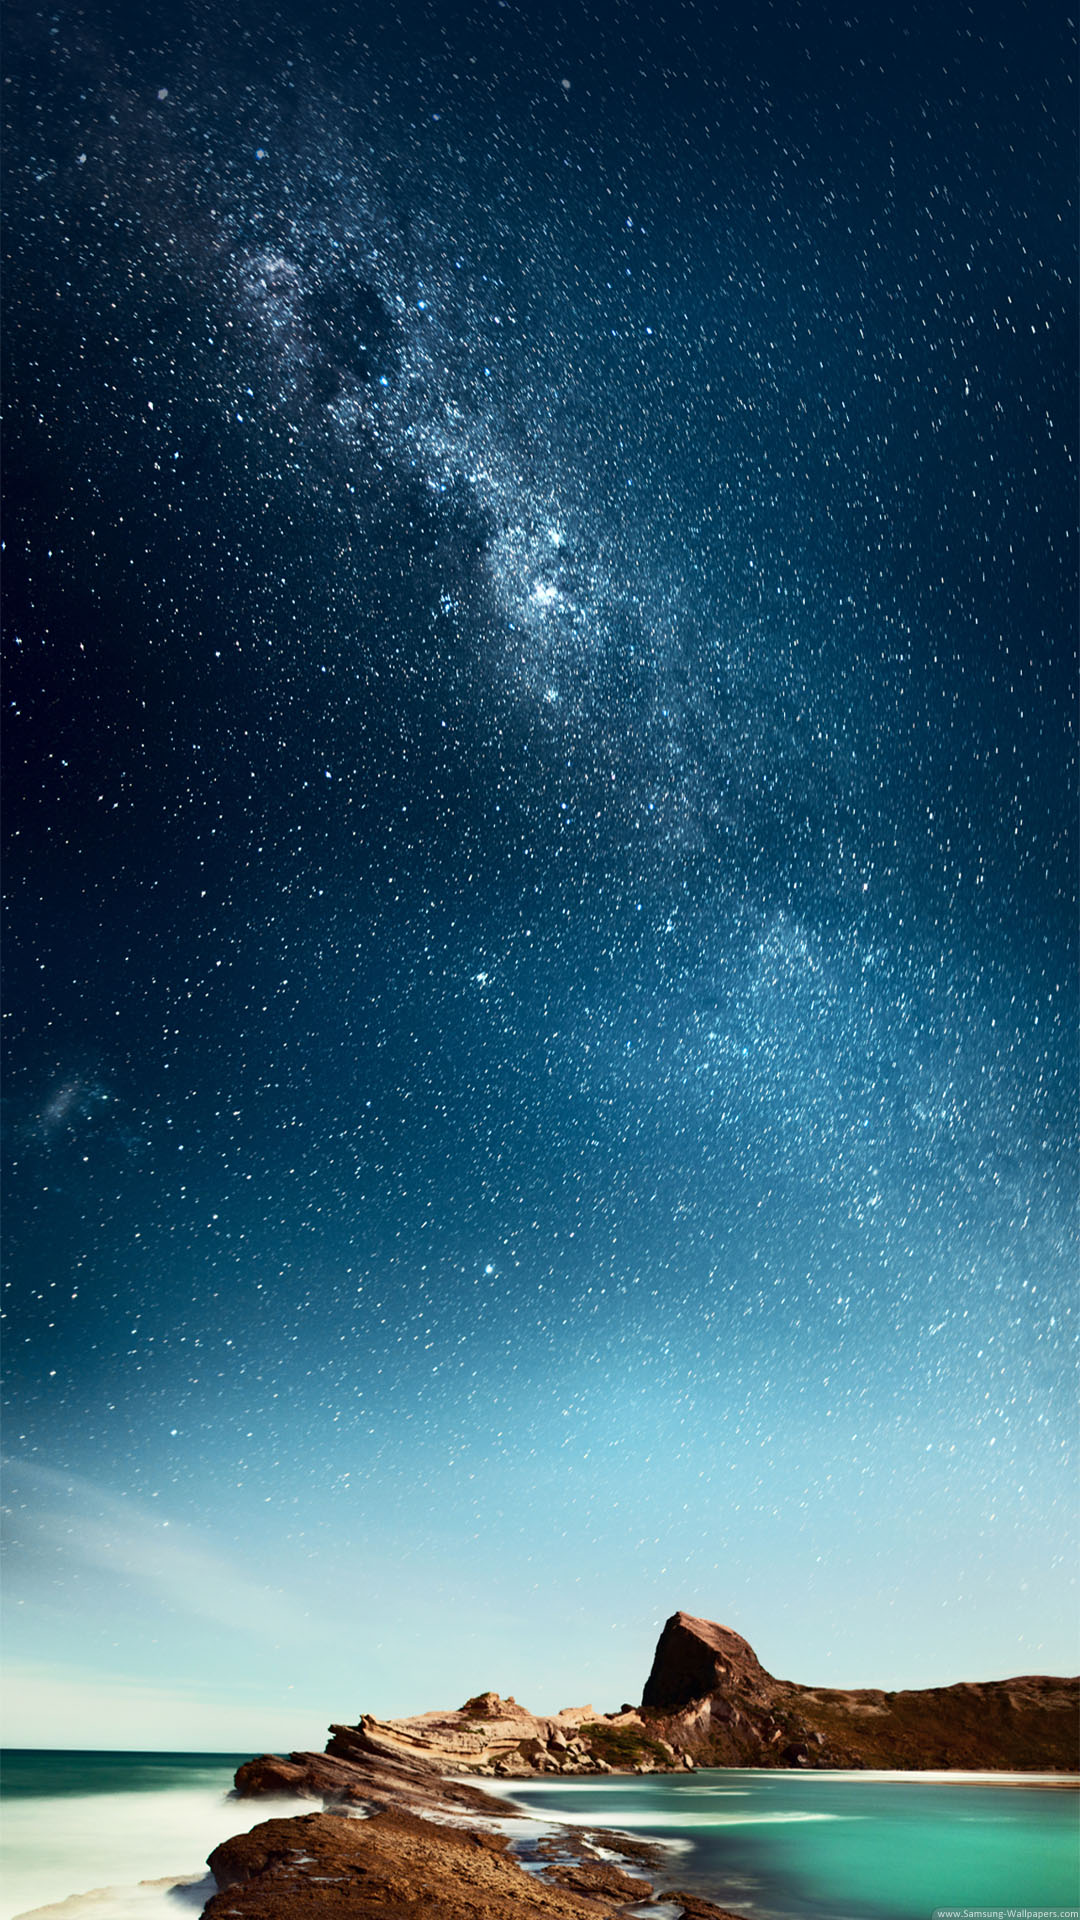 wallpaper samsung galaxy are here for download These wallpaper 1080x1920